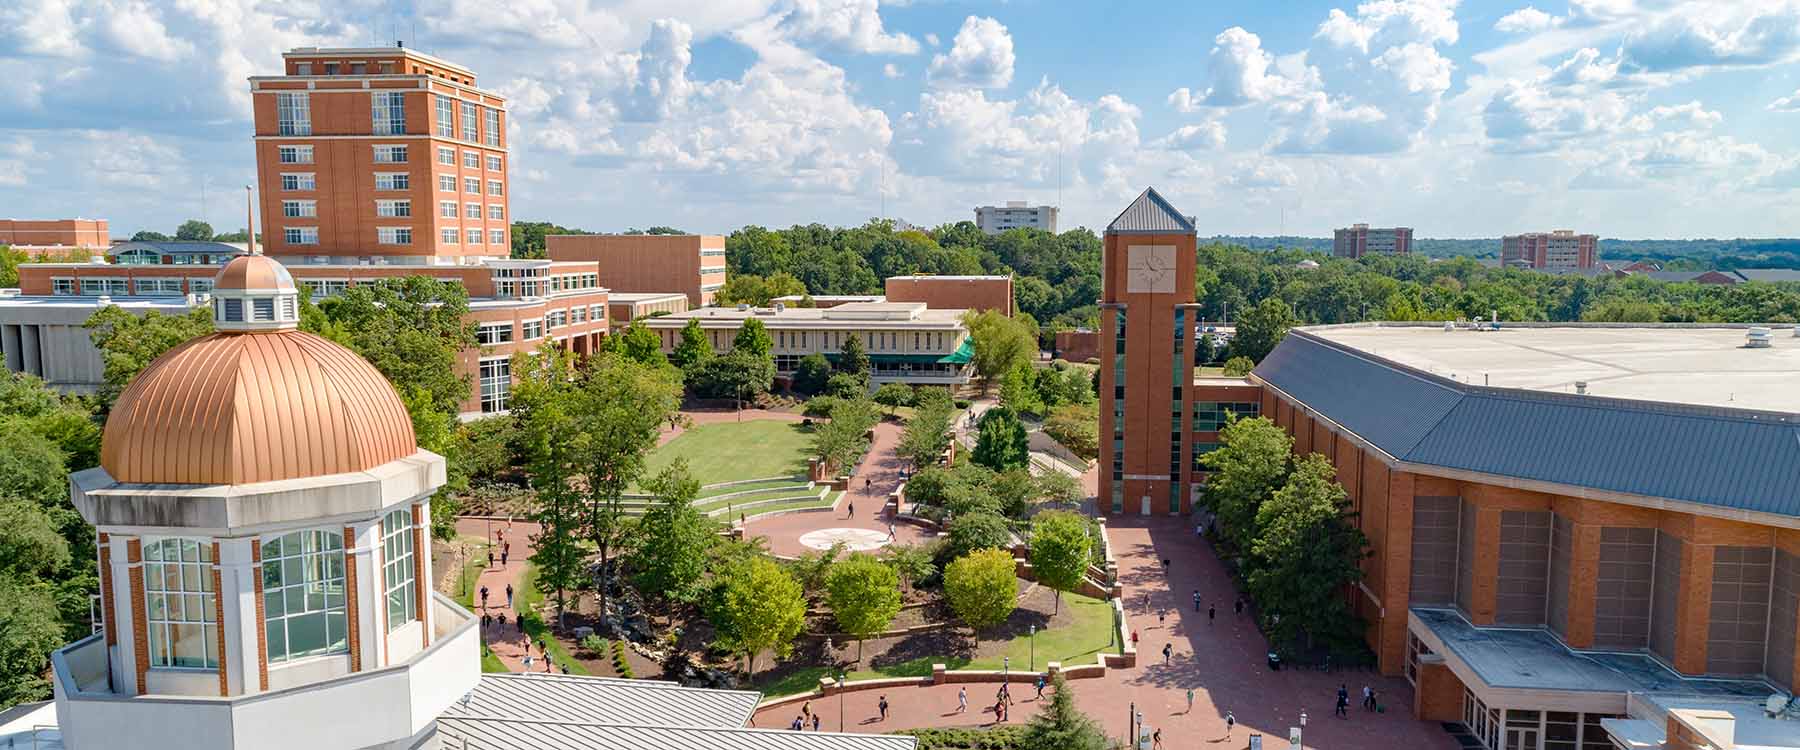 UNC Charlotte inventions, patents, licenses and startups are driving the innovation economy 